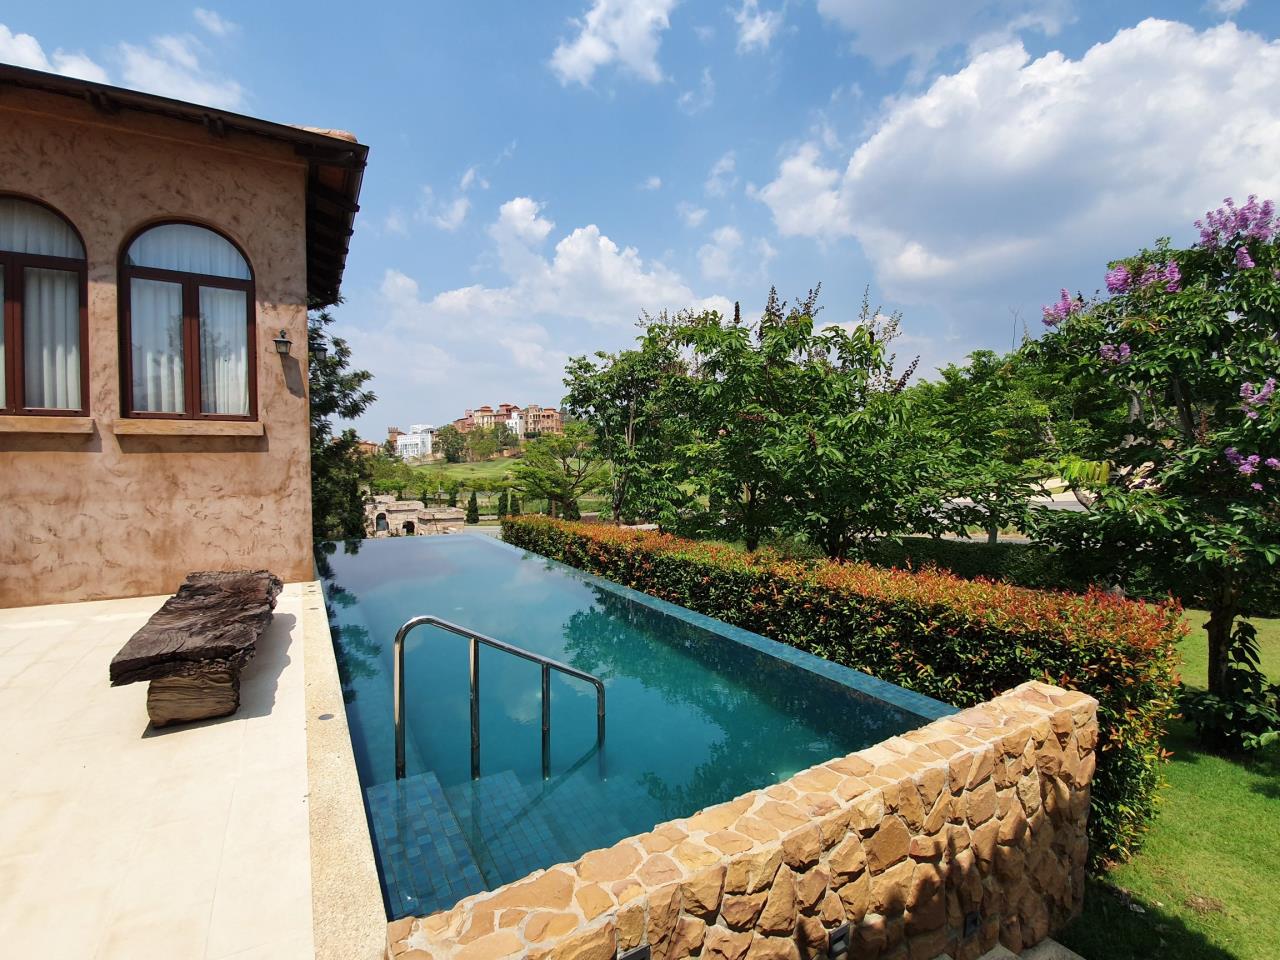 4 Bedrooms 4 Bathrooms Size 633sqm The Valley Khaoyai For Sale 70000000 THB